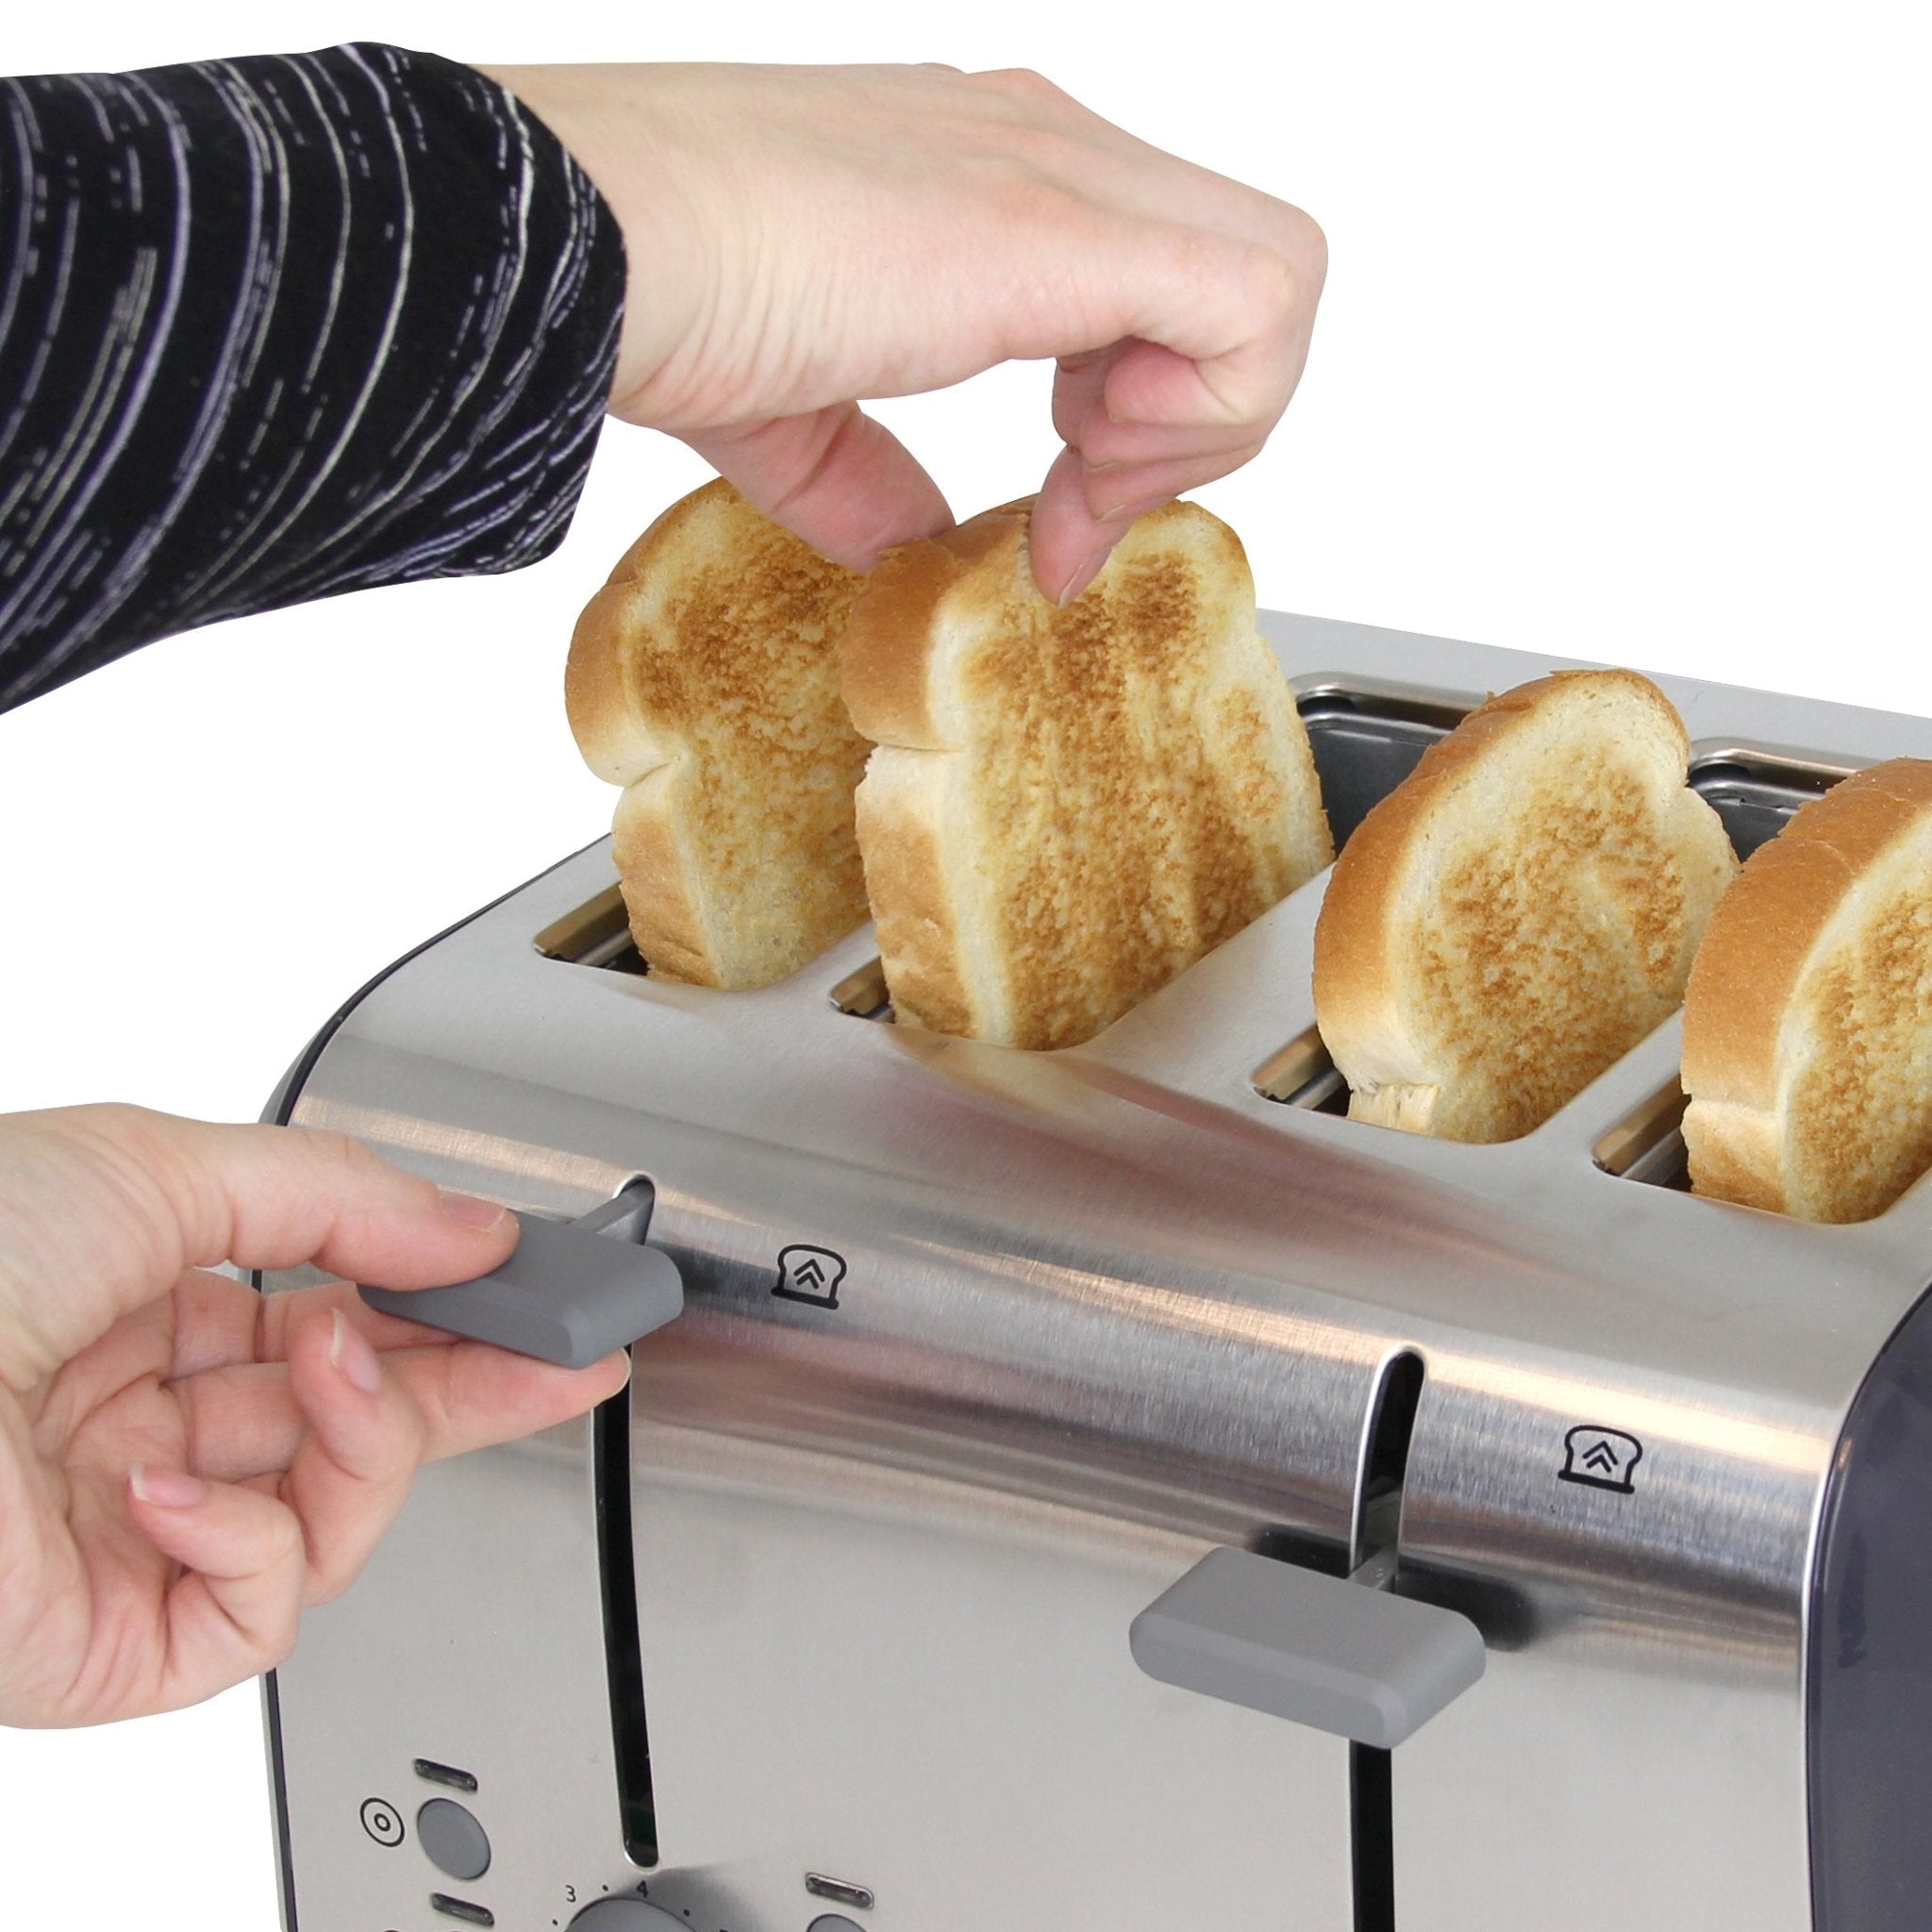 West Bend 4-Slice Toaster with Anti-Jam and Auto-Shut-Off, in  Black/Stainless Steel (78824)